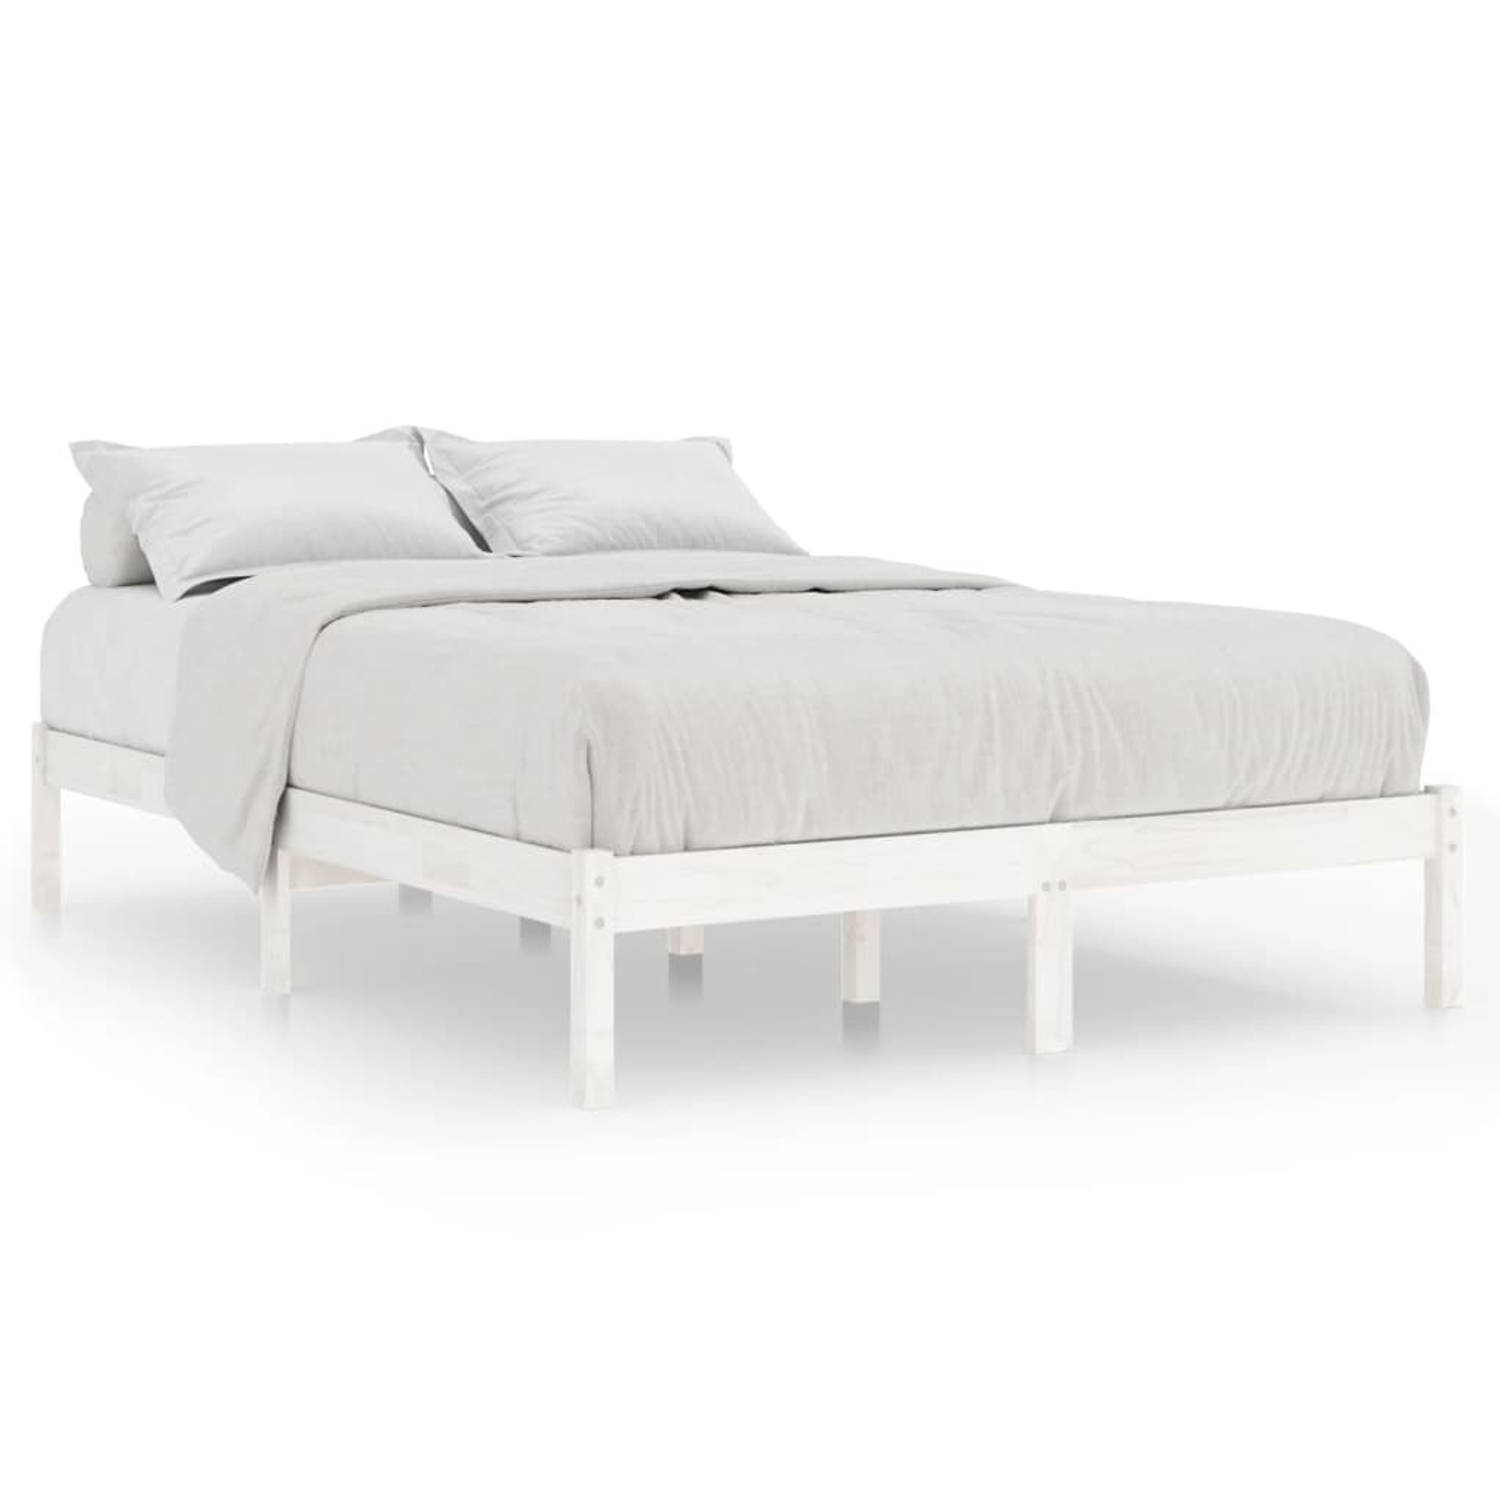 The Living Store Bedframe massief grenenhout wit 140x200 cm - Bed